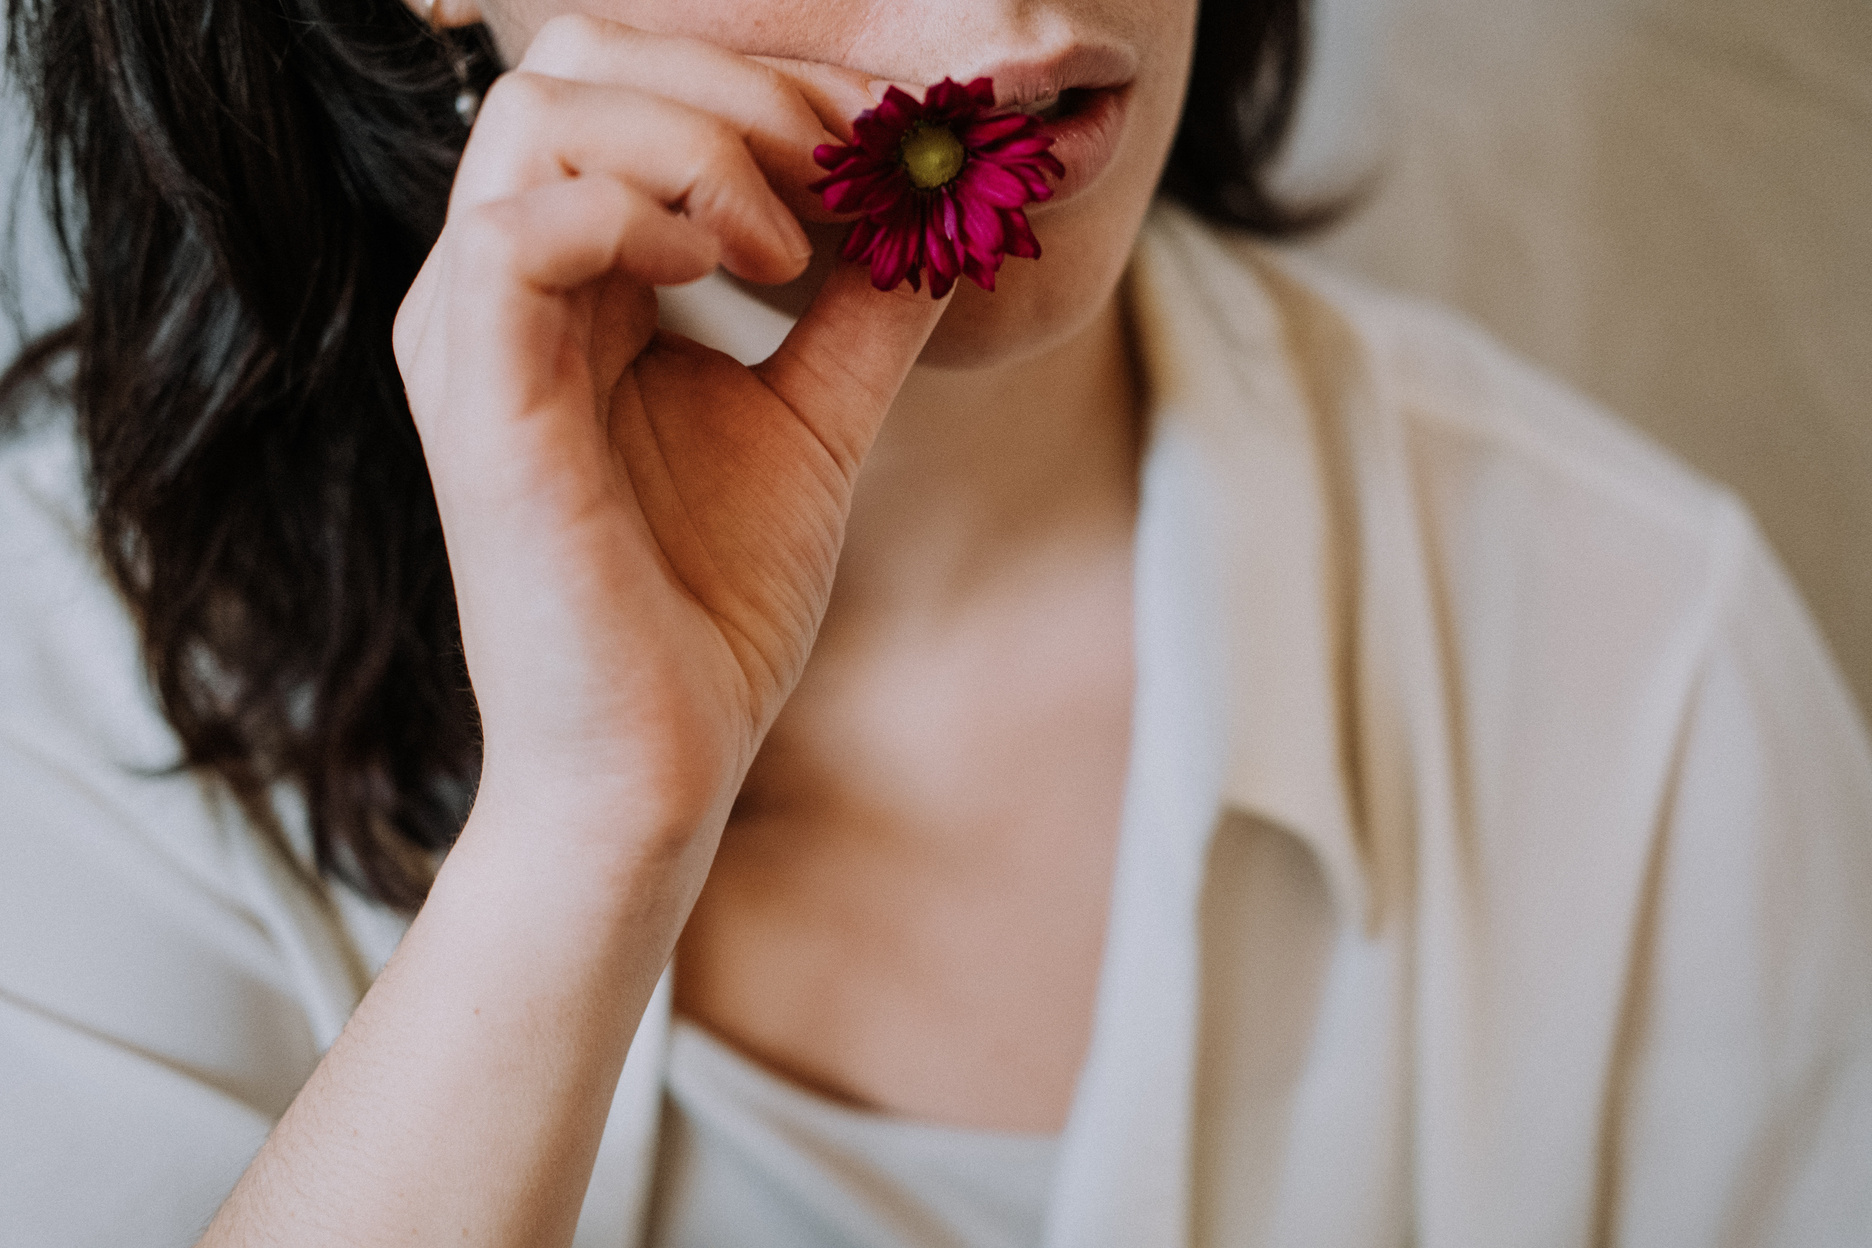 Woman putting blooming flower in mouth